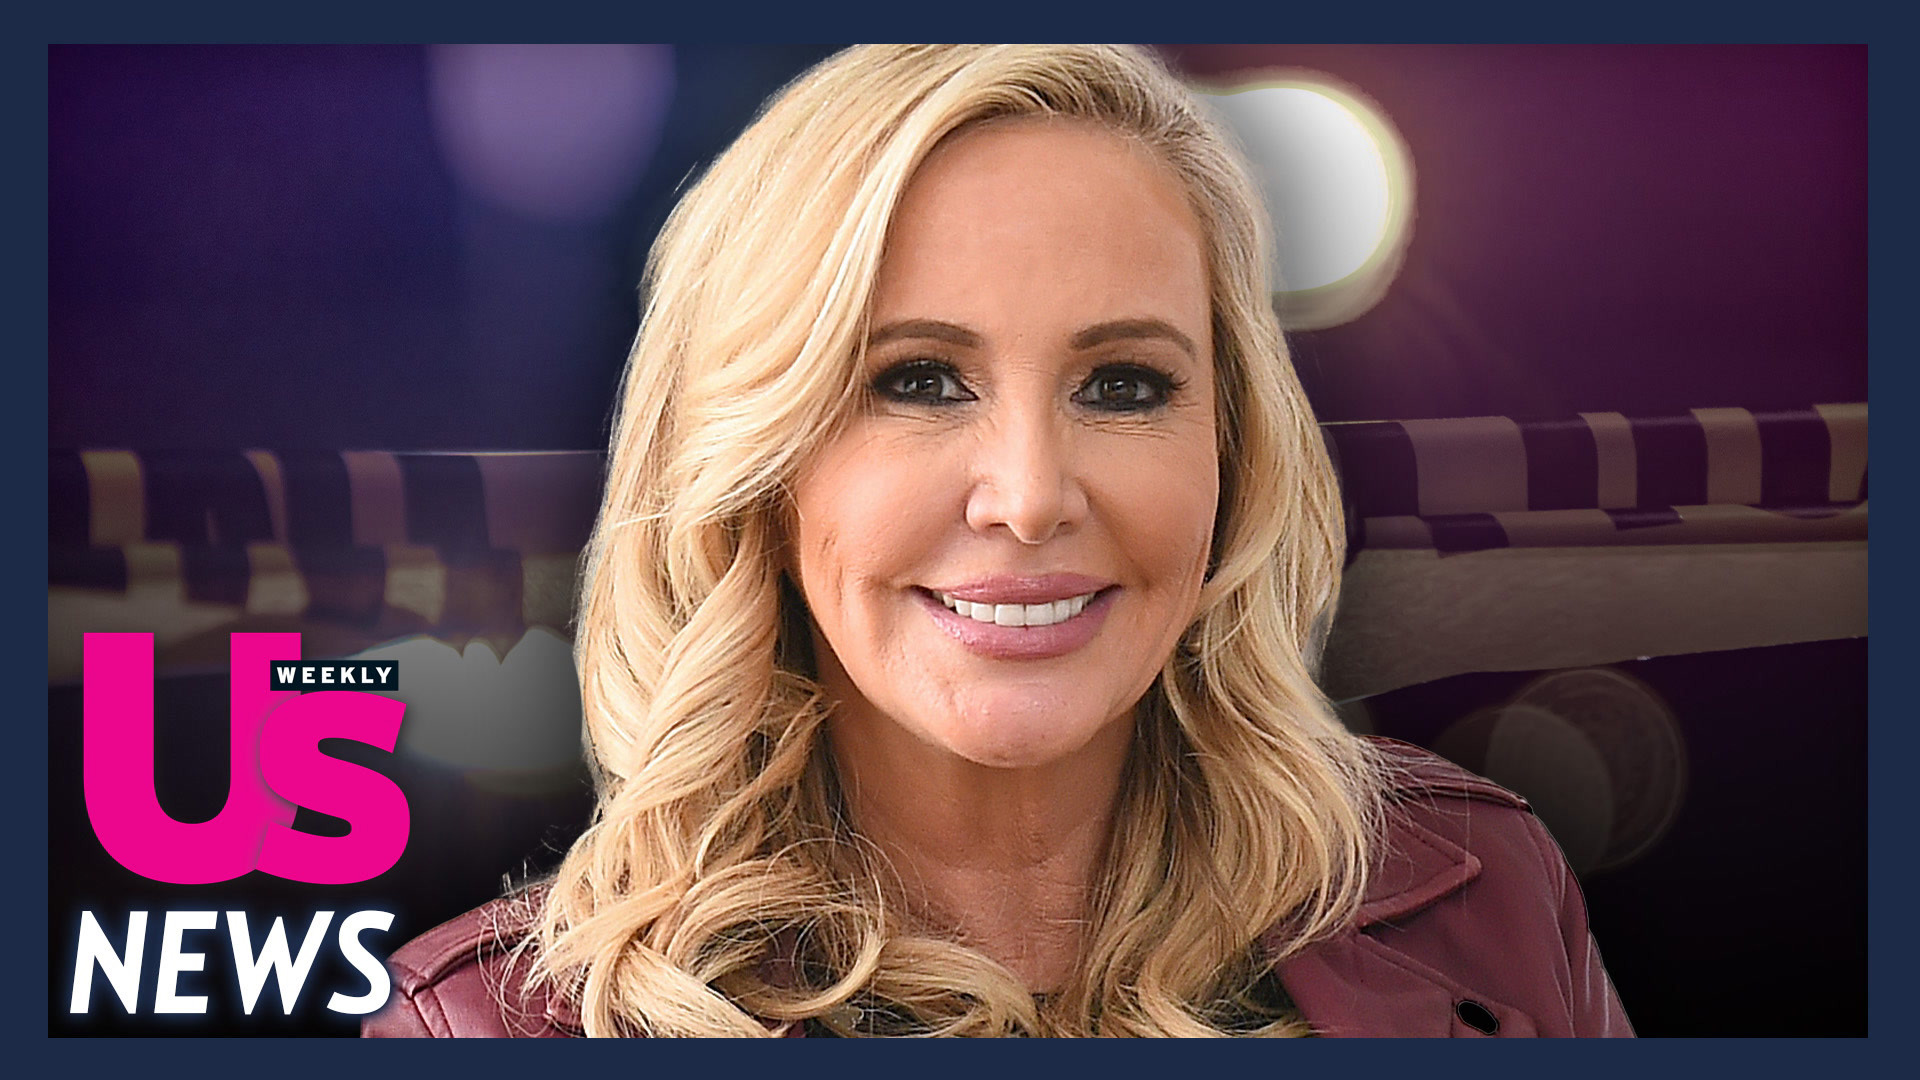 RHOC's Shannon Beador Arrested for Hit-and-Run, DUI